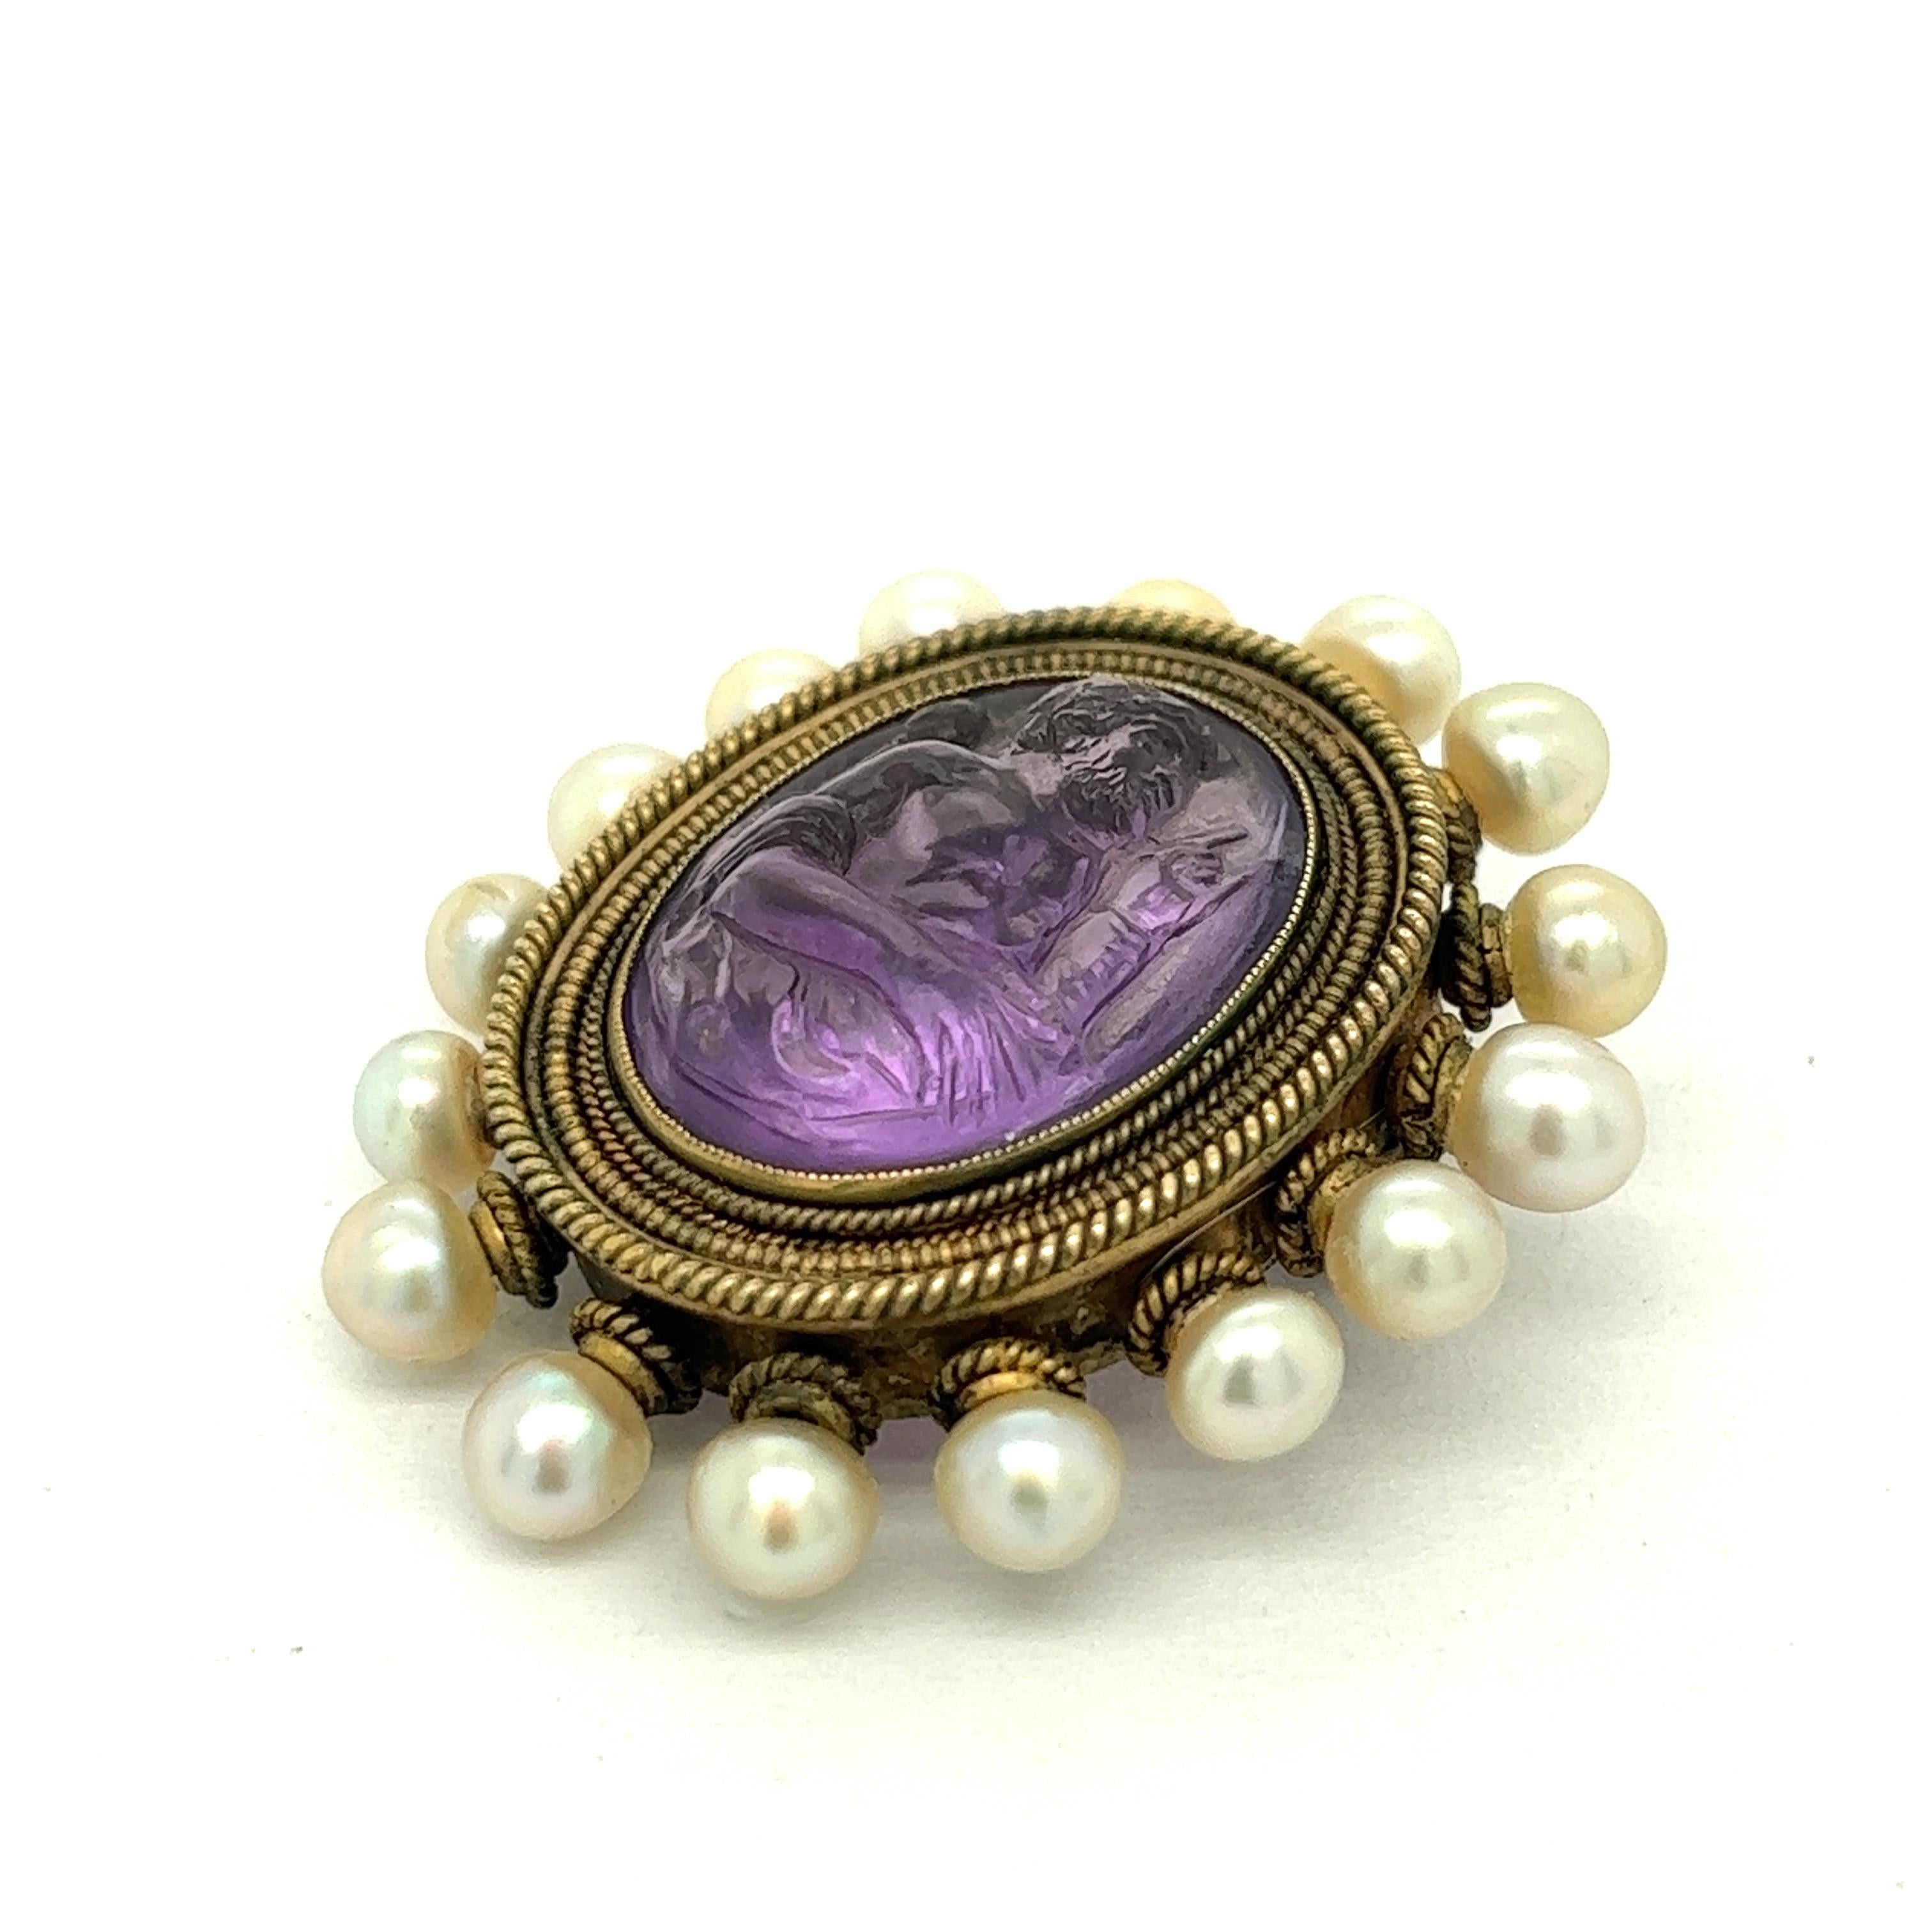 Castellani Amethyst Cameo Pearl Oval 18k Gold Brooch

One carved amethyst cameo (14.5 x 18 mm) set on 18 karat yellow gold with various shaped pearls (4.5 to 4.6 mm); marked with personal engraving (MBF) and maker's mark

Size: width 1.25 inches,